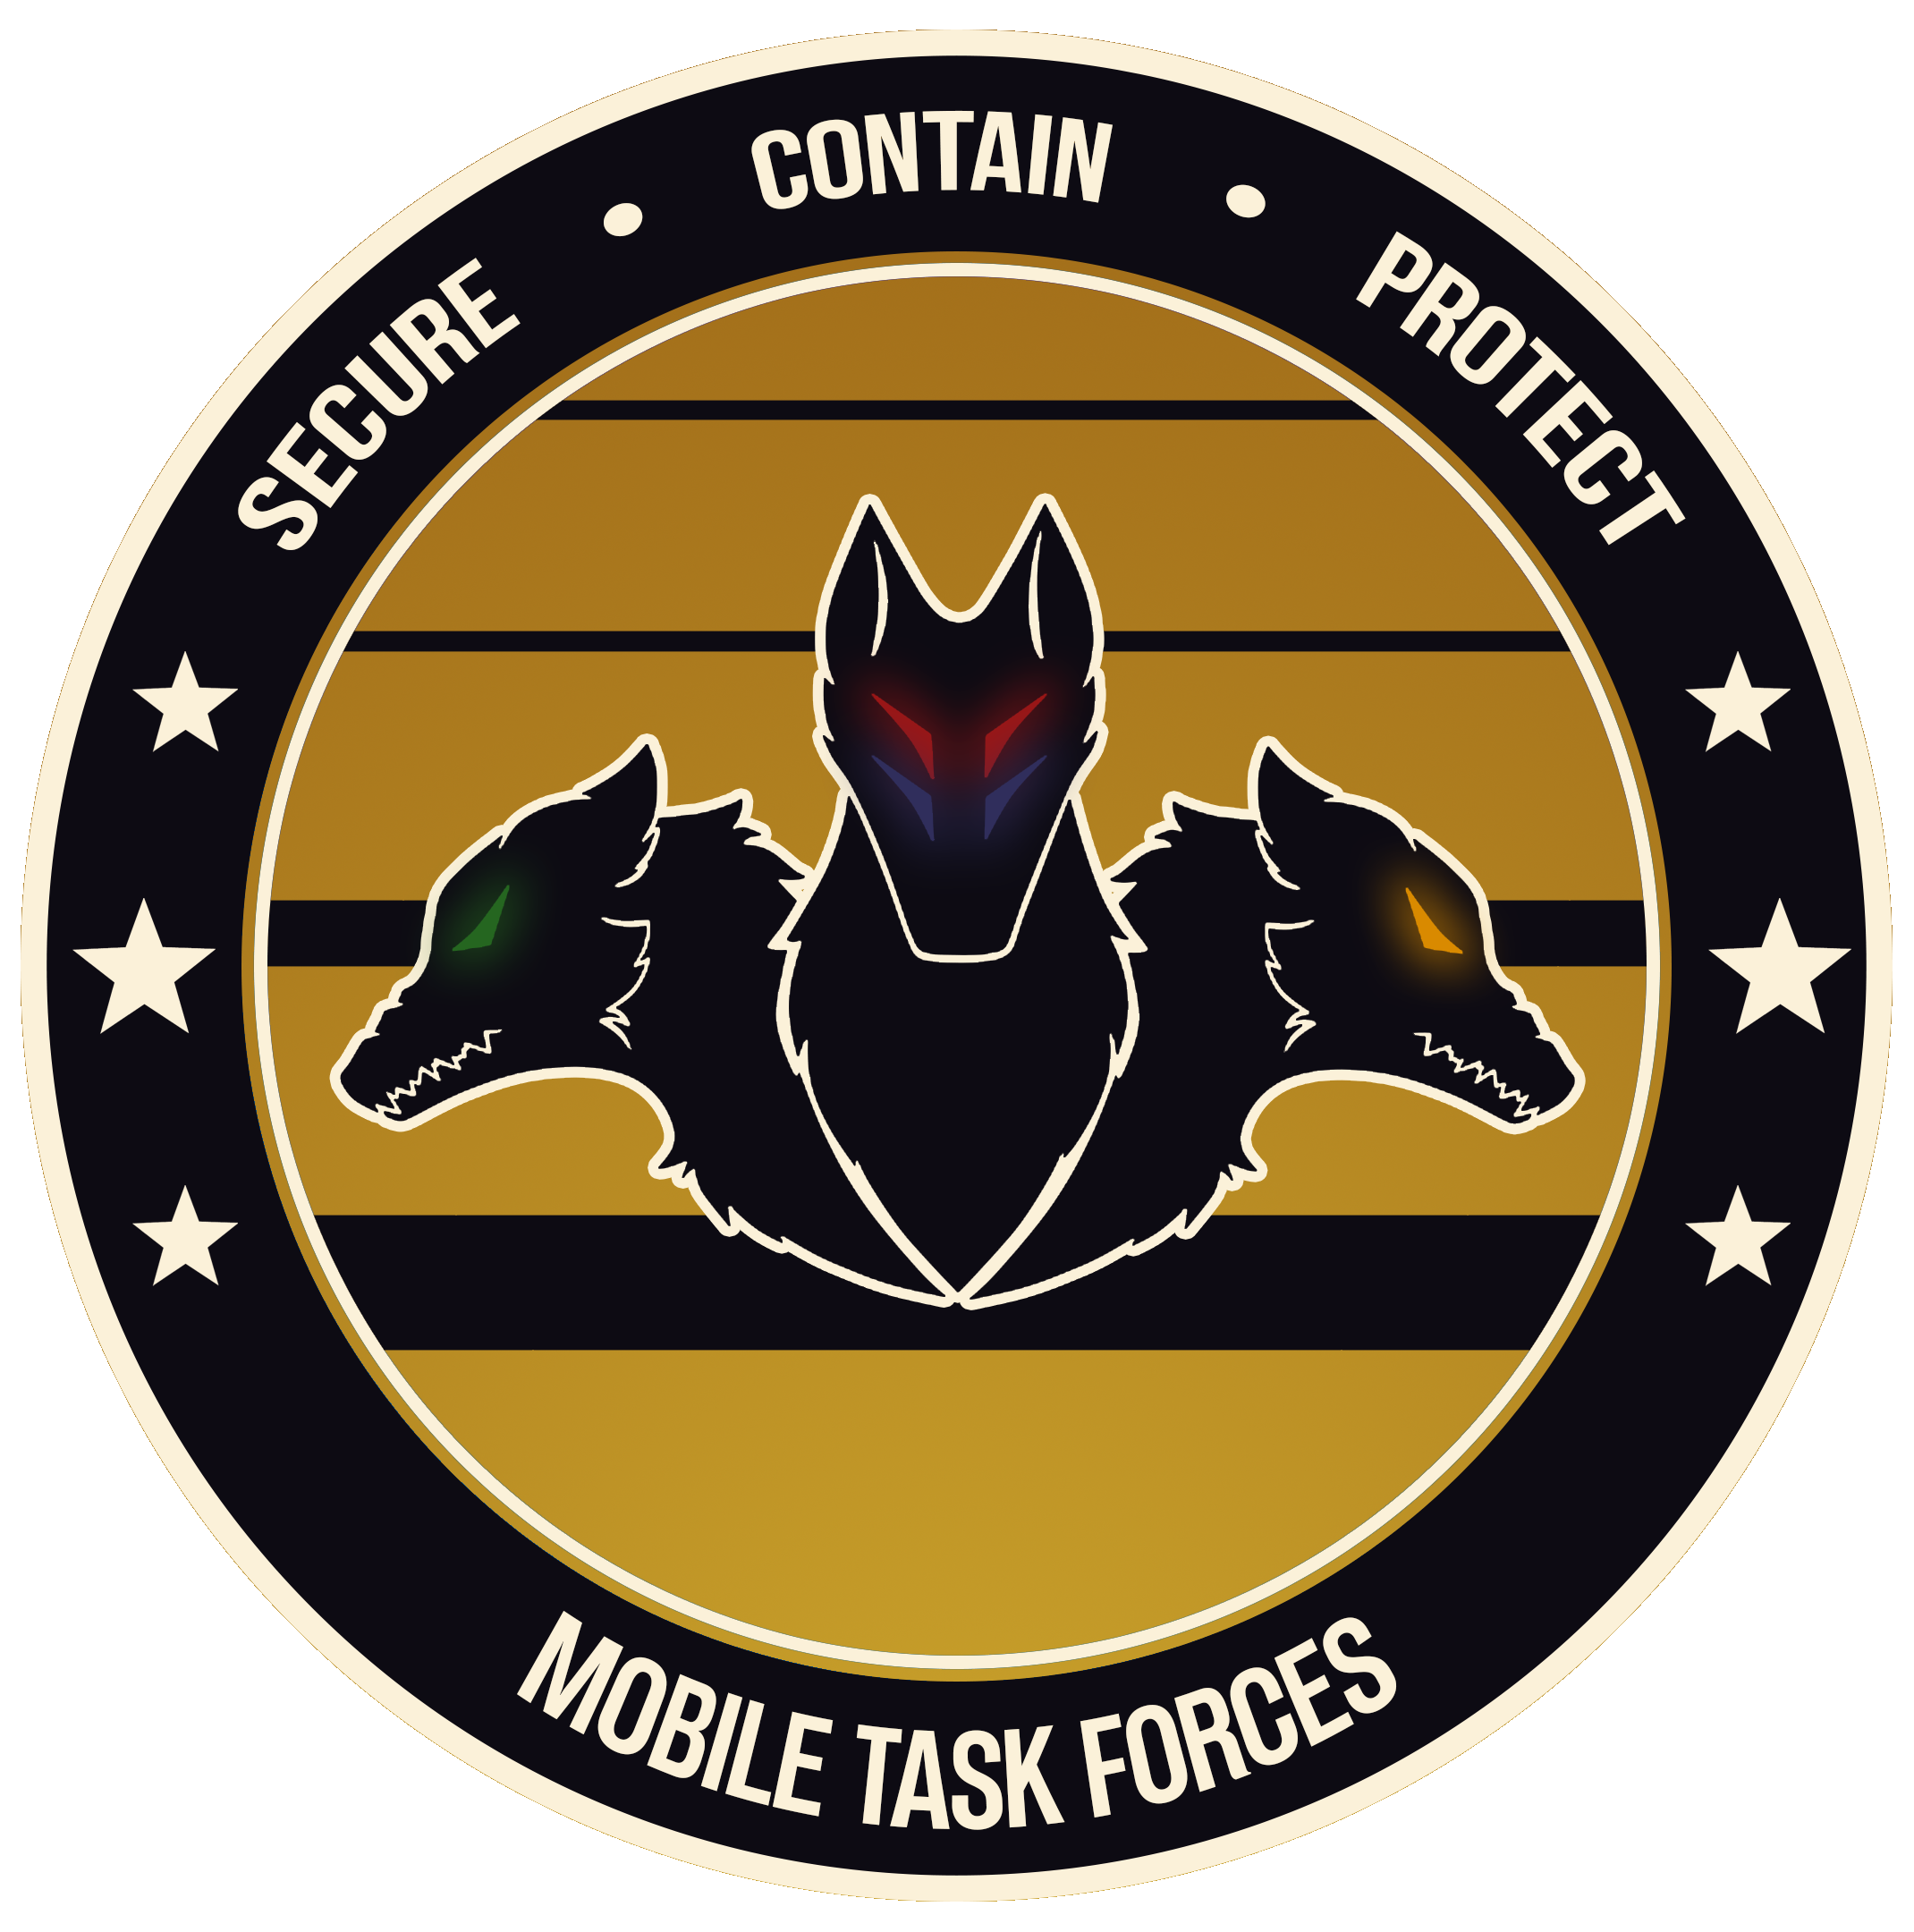 Paragon_Mobile_Task_Forces.png